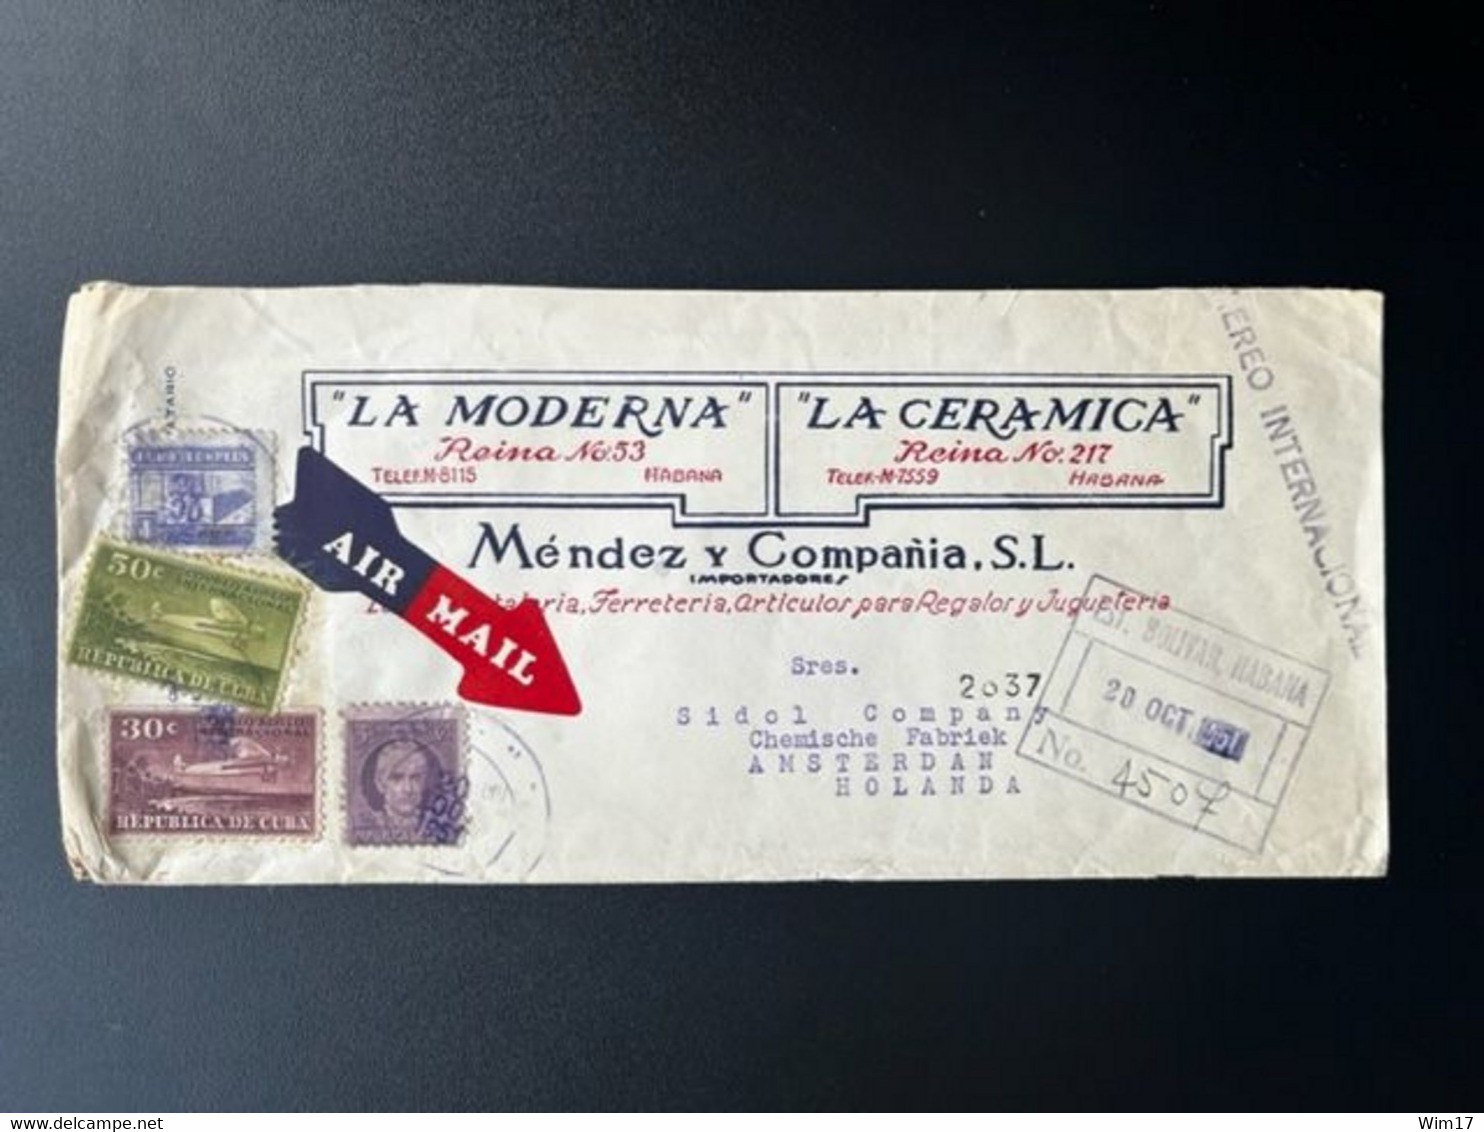 CUBA 1951 REGISTERED LETTER HAVANA TO AMSTERDAM 20-10-1951 - Covers & Documents